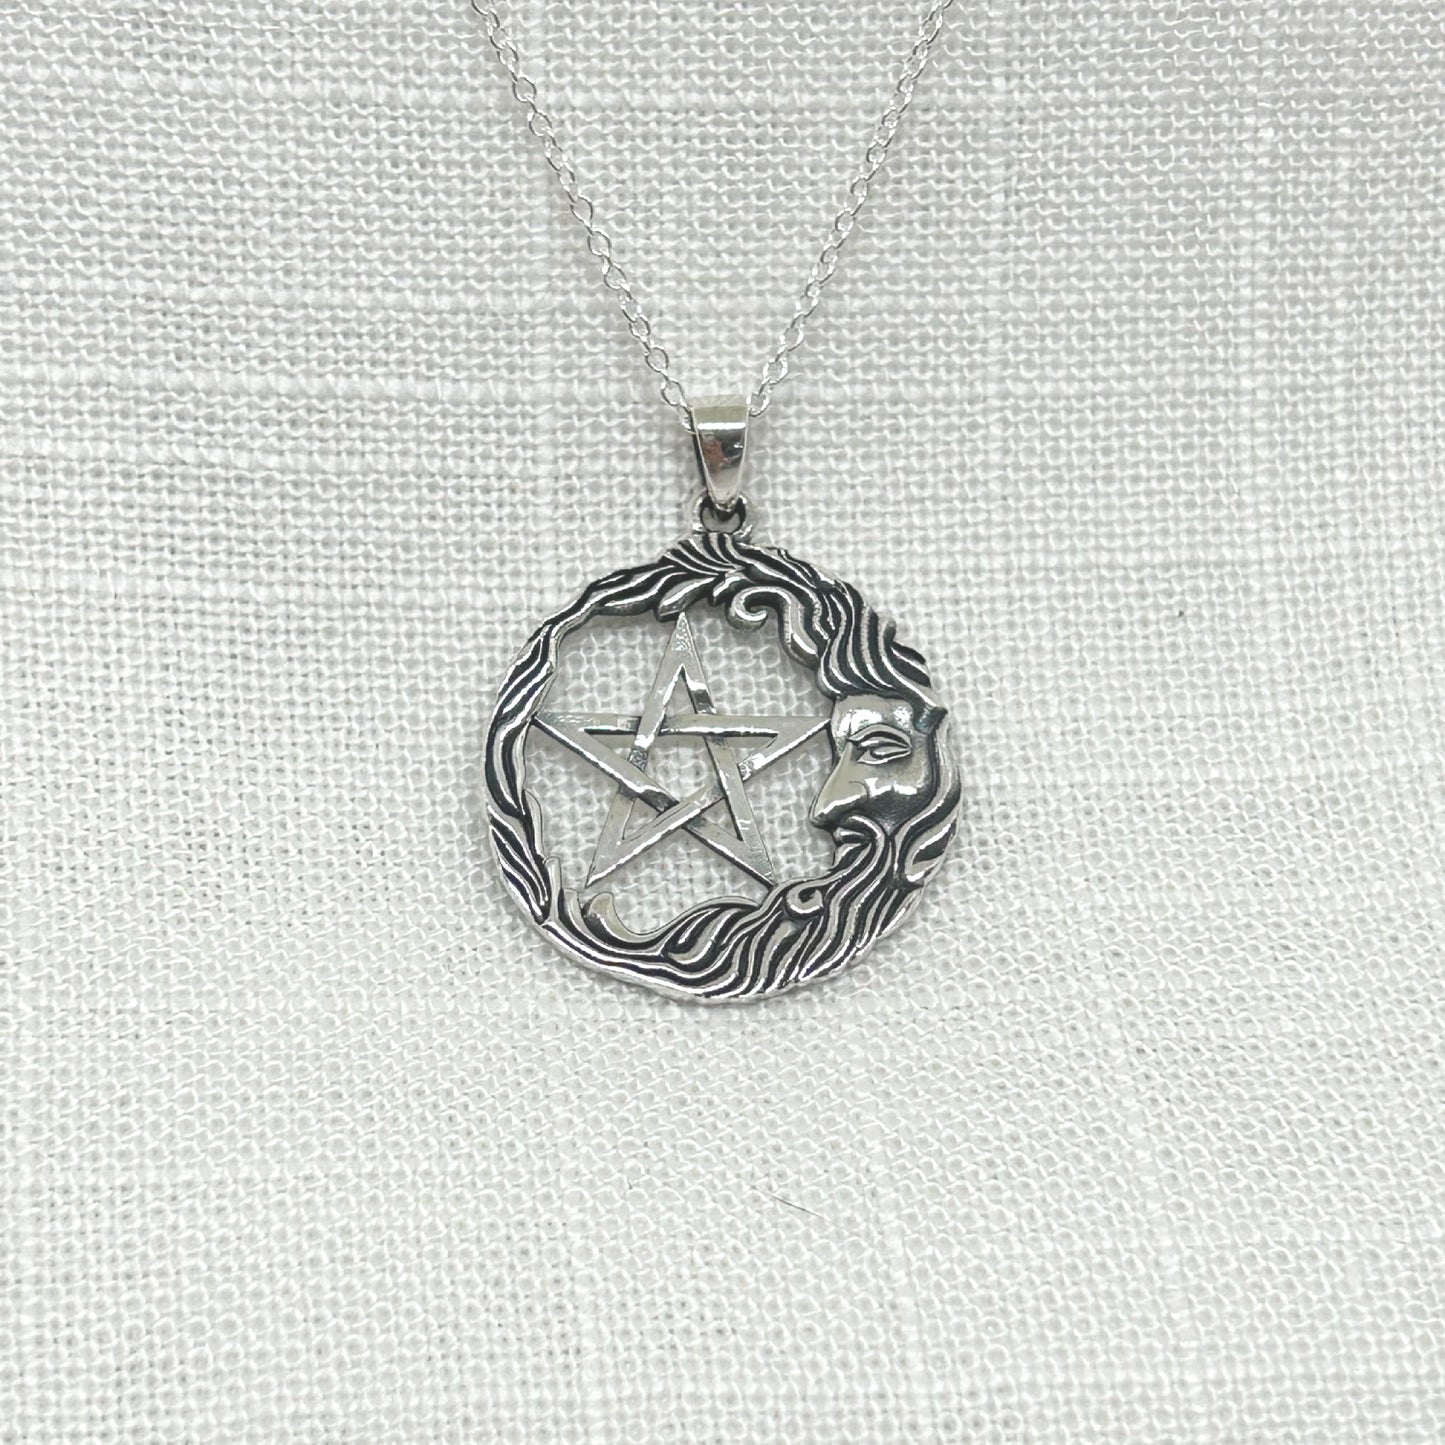 This stunning unisex crescent shaped wise man is sat in front of a pentagram with his beard and hair circling around the pendant. Size approx: H: 3cm incl bale x W: 2.4cm. All pendants come supplied on a 20" Sterling Silver Curb Chain and are gift boxed. This design is also available with a tree of life